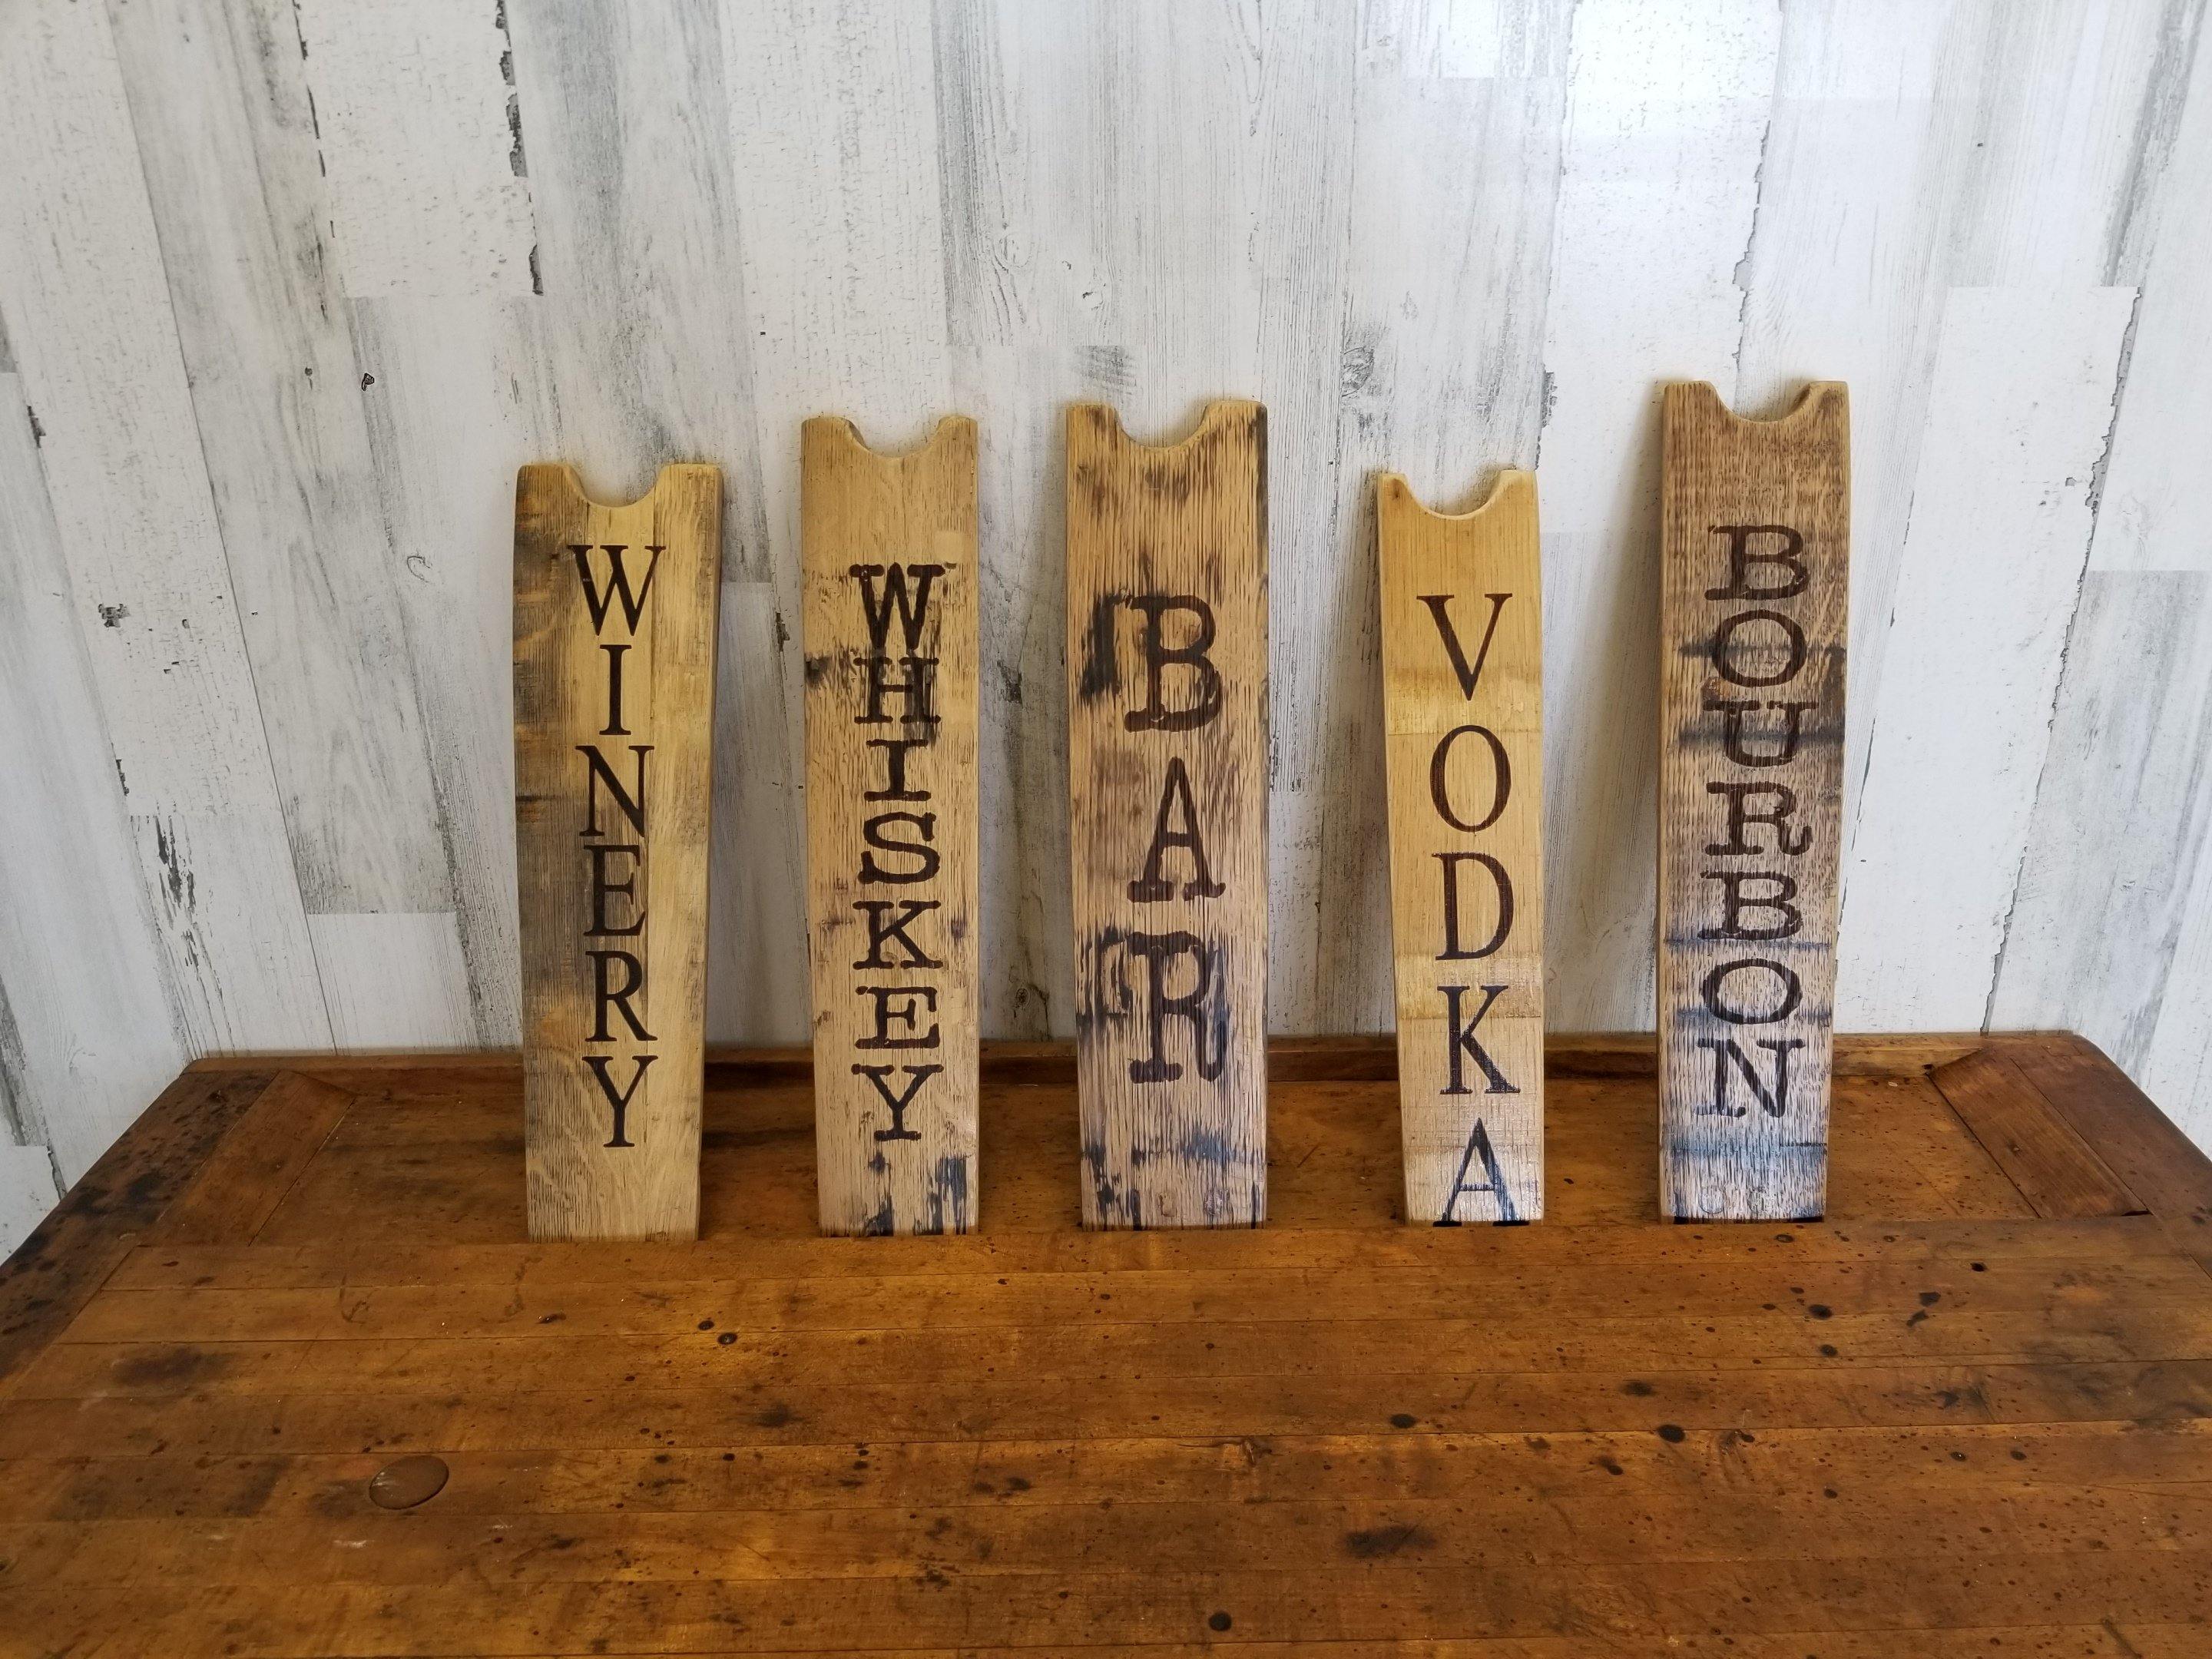 Rustic Wooden Half Stave Wall Art With Bar Drink Sayings